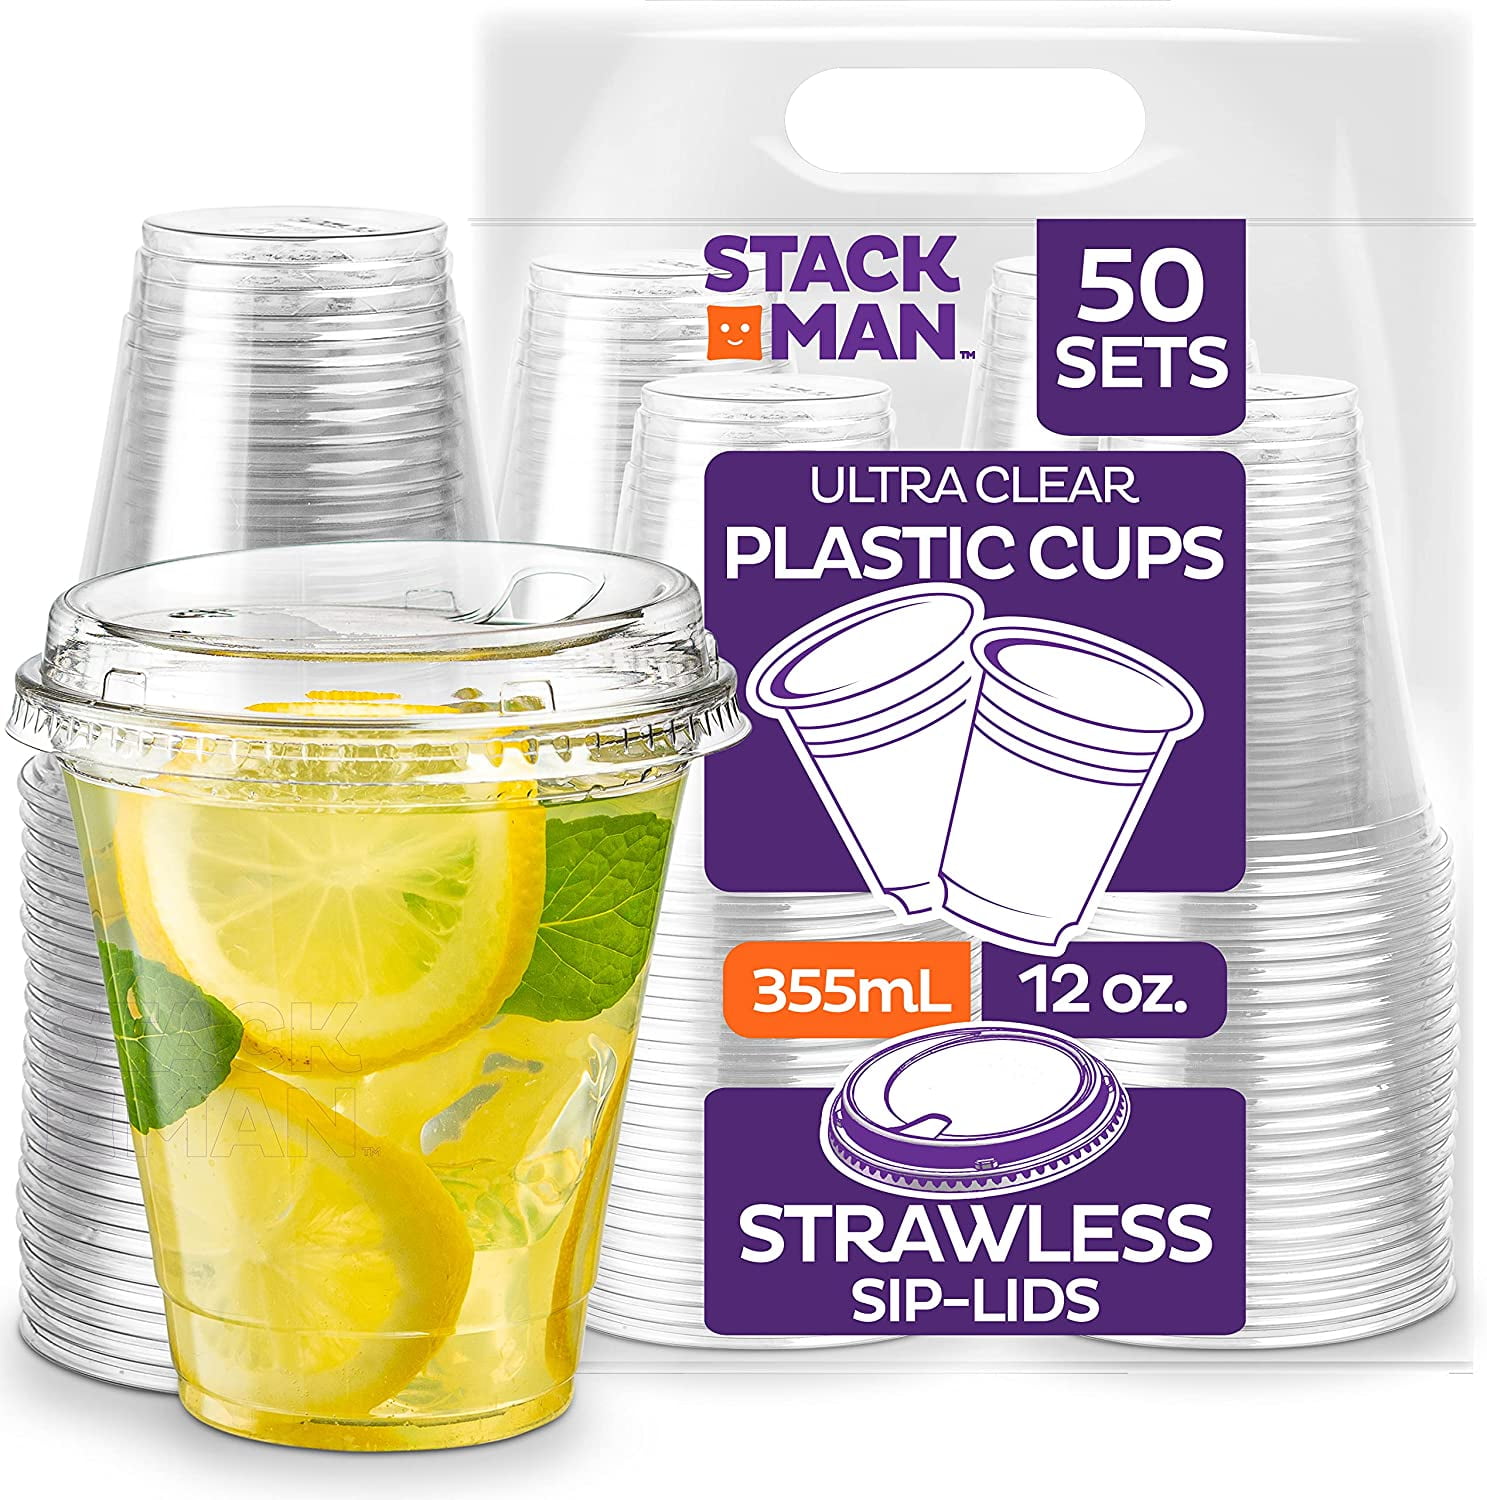 Single Serve Cups with Tab Lids and Spoons - Stanpac